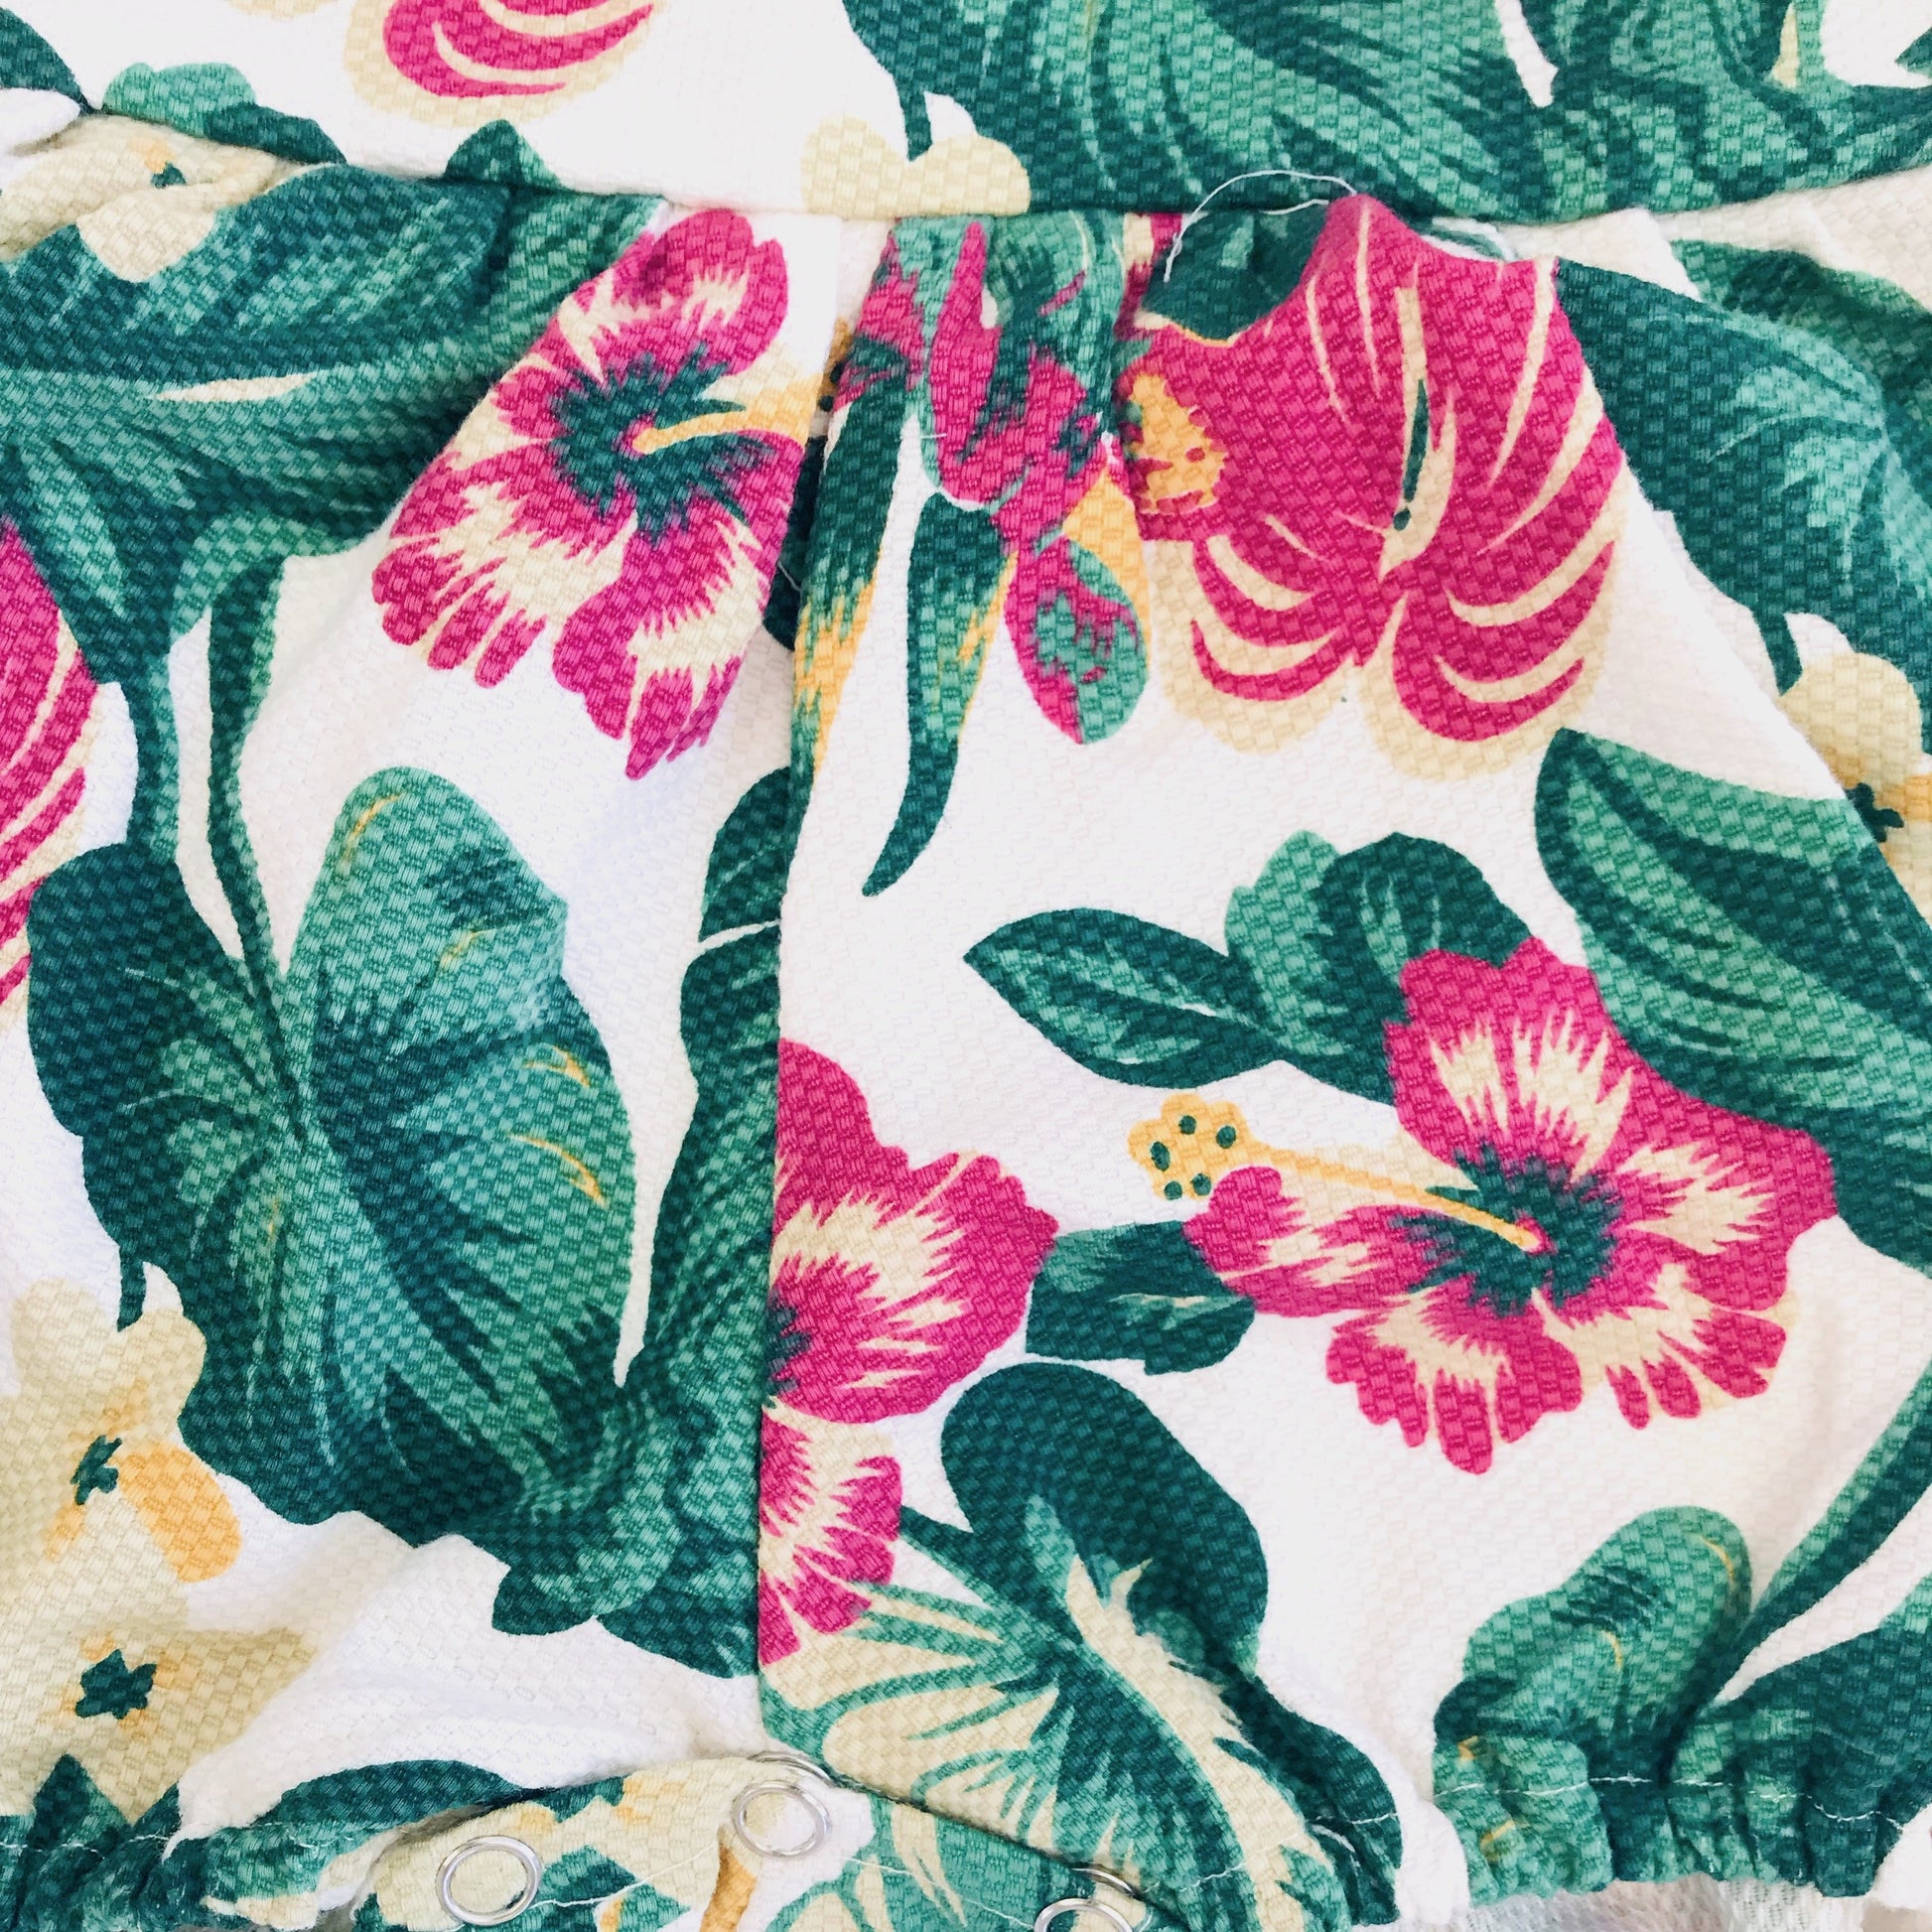 Orchid Playsuit in Tropical Garden - Lil' Tati